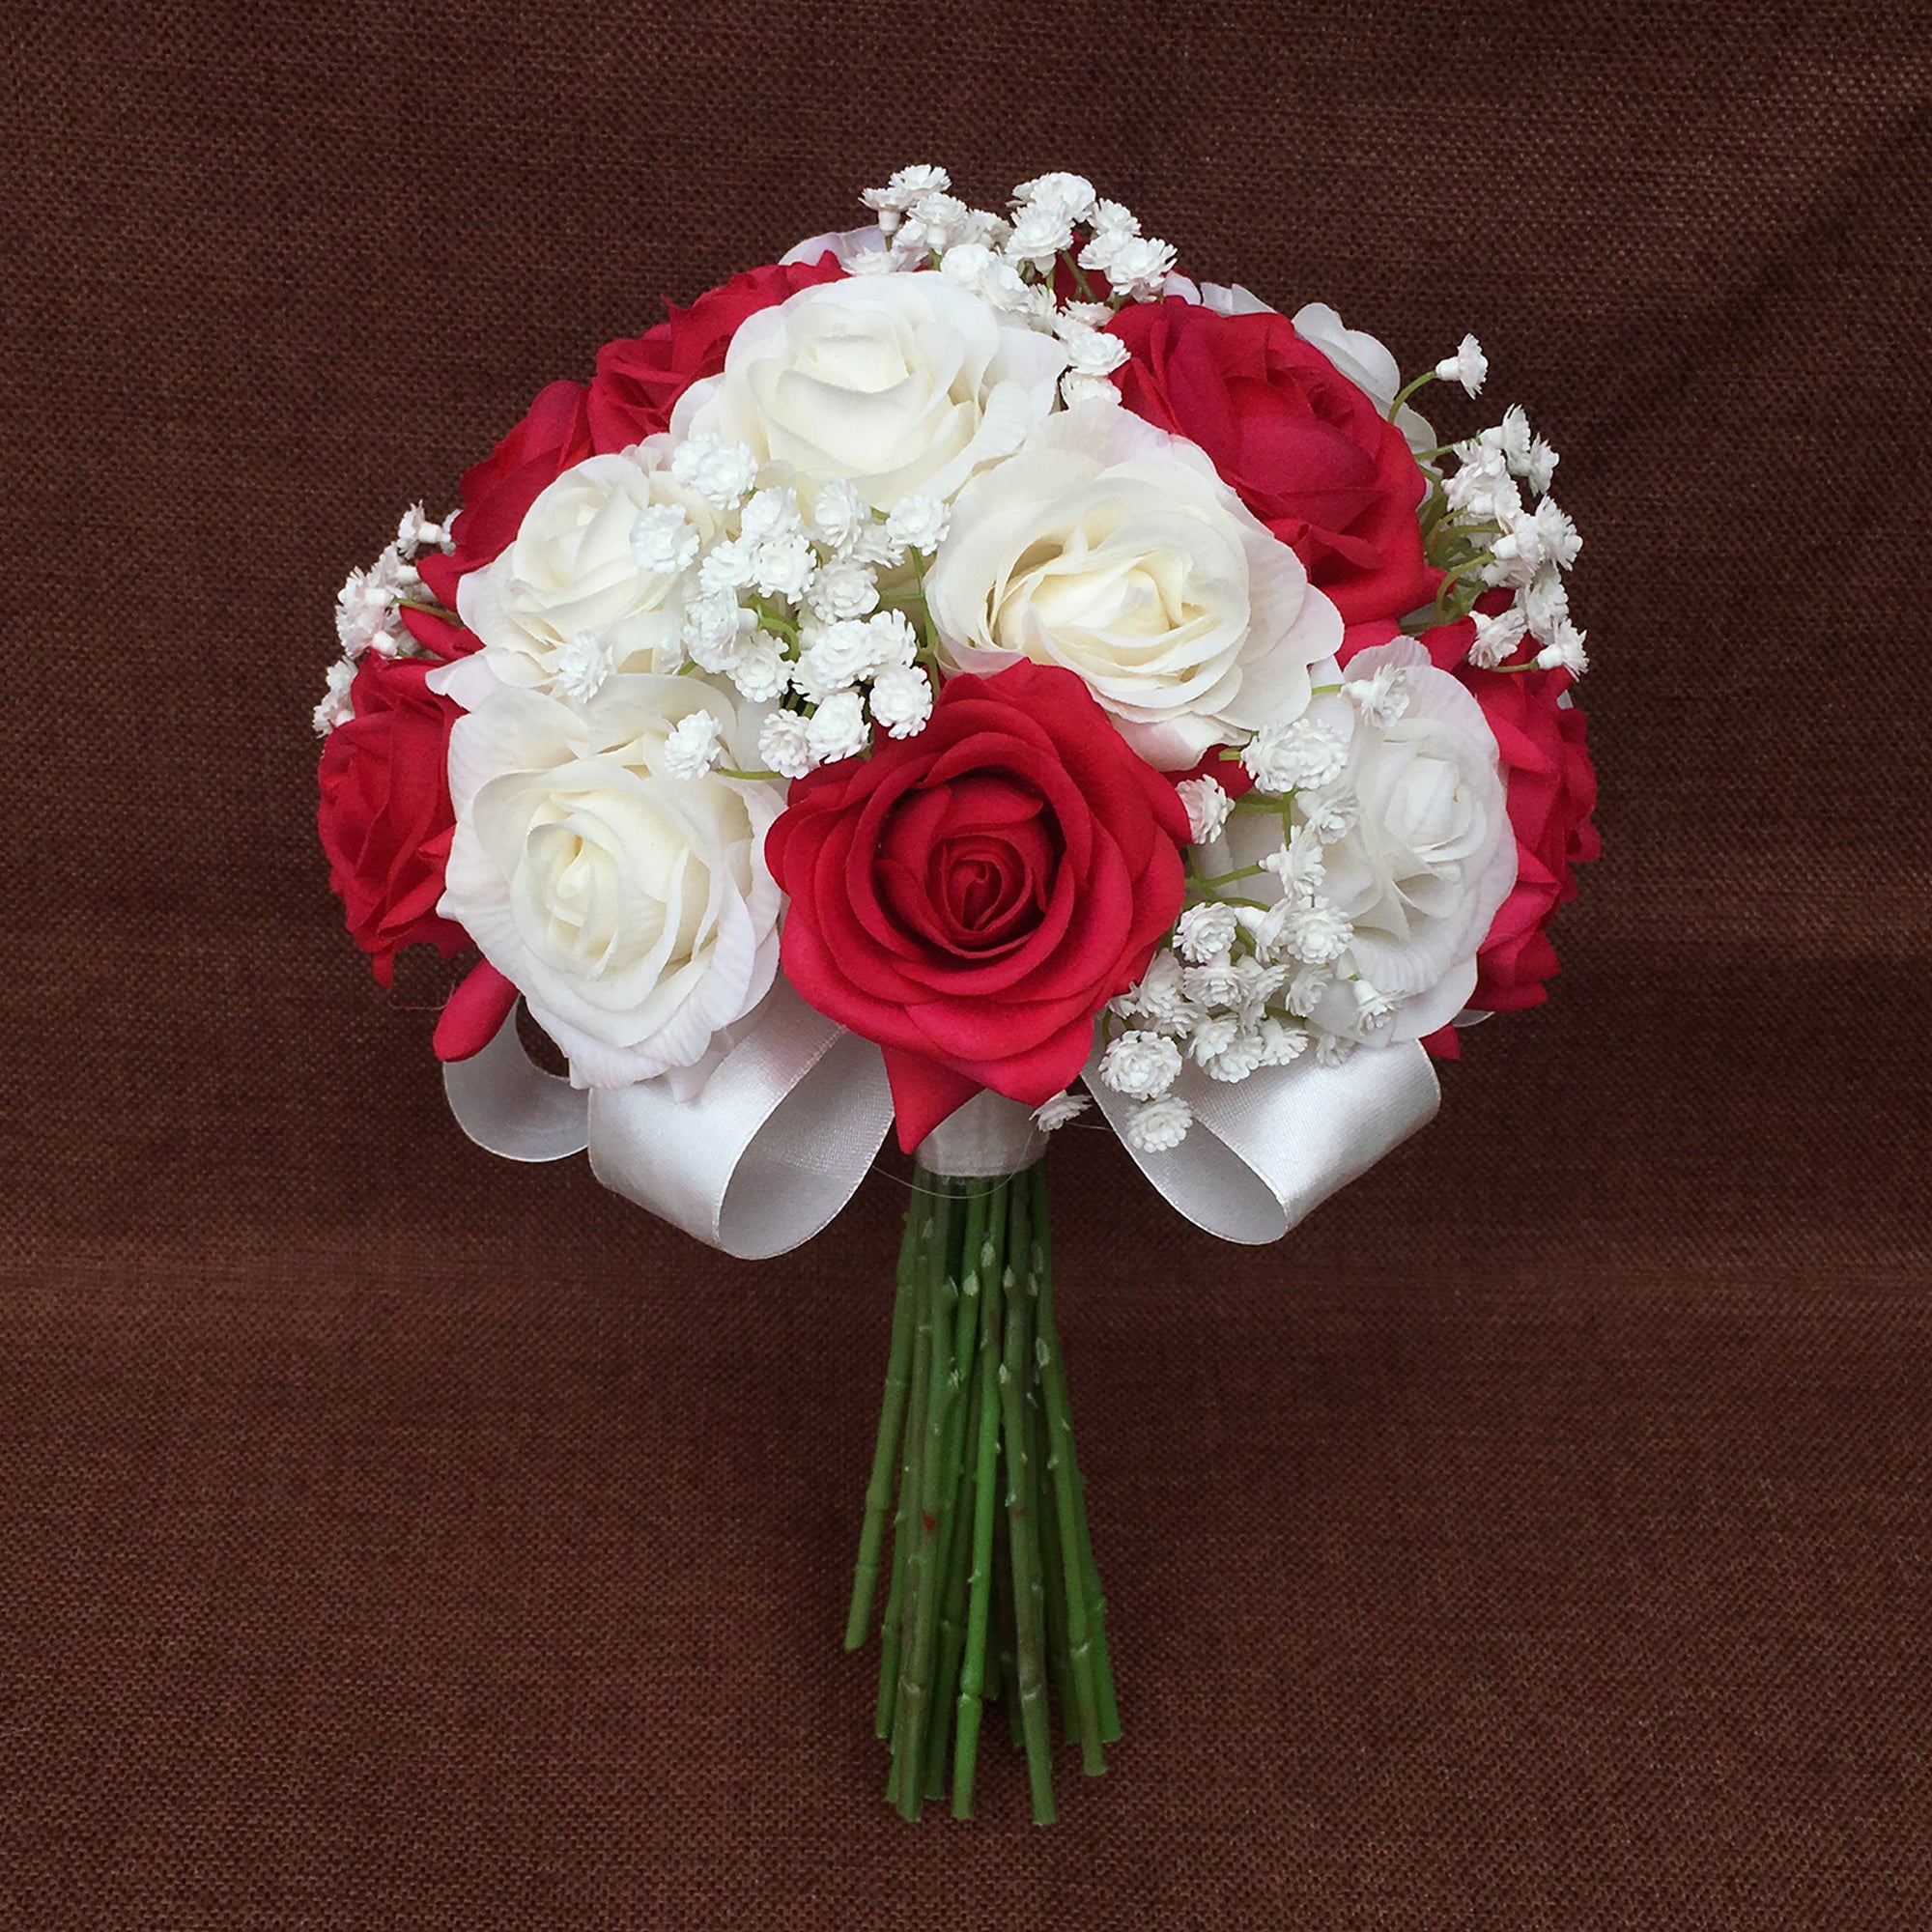 White and Fuchsia Bridal Flower Bouquet with Babys Breath